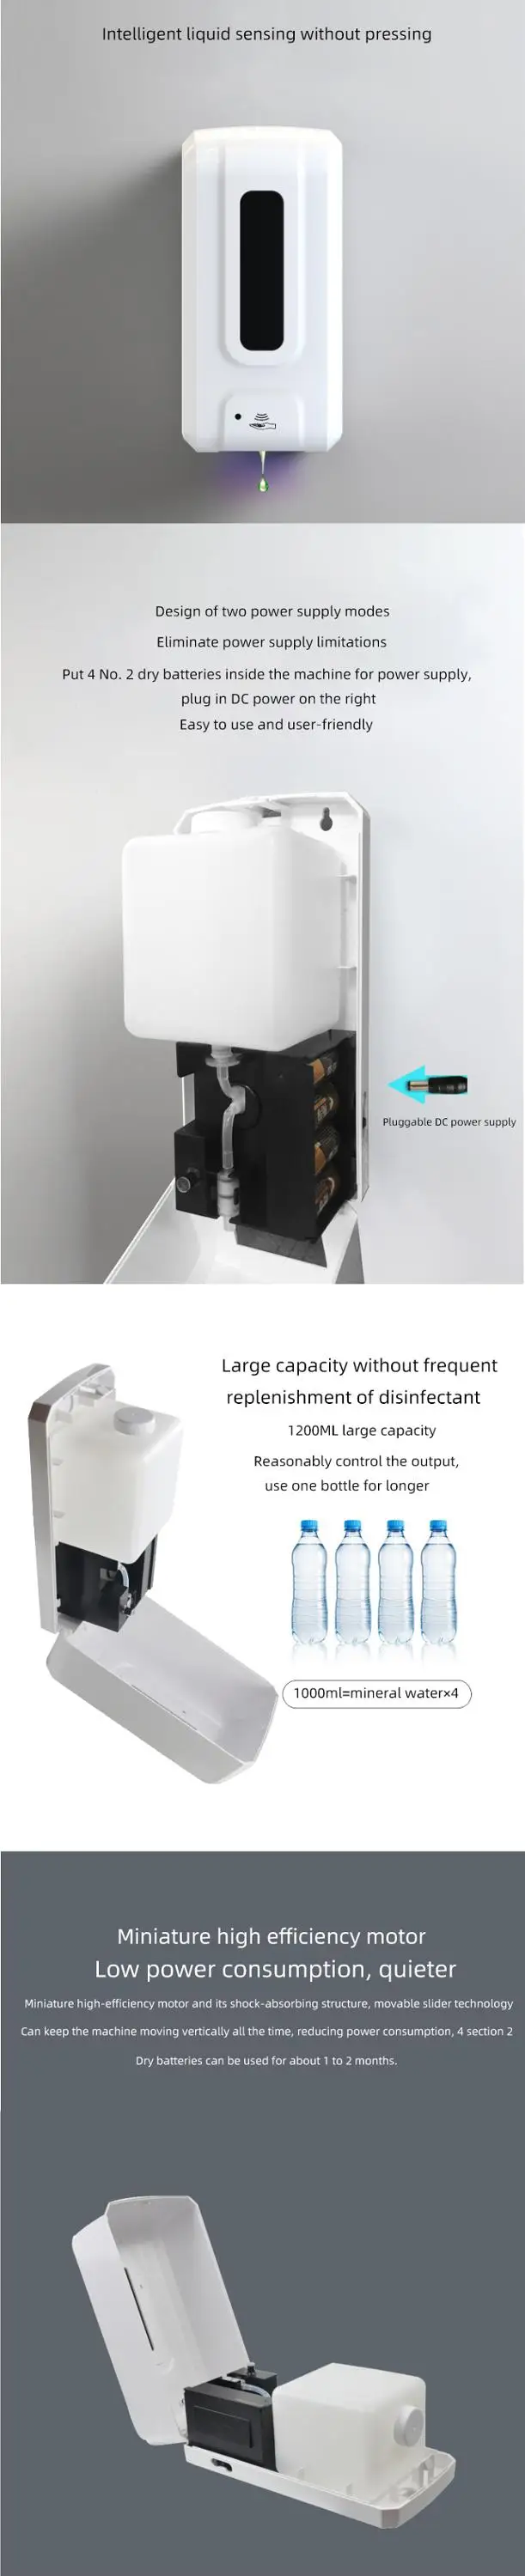 Automatic Soap Dispenser Infrared Sensor Soap Dispensers Suit for Smart Home Dispensary Clinic Hospital